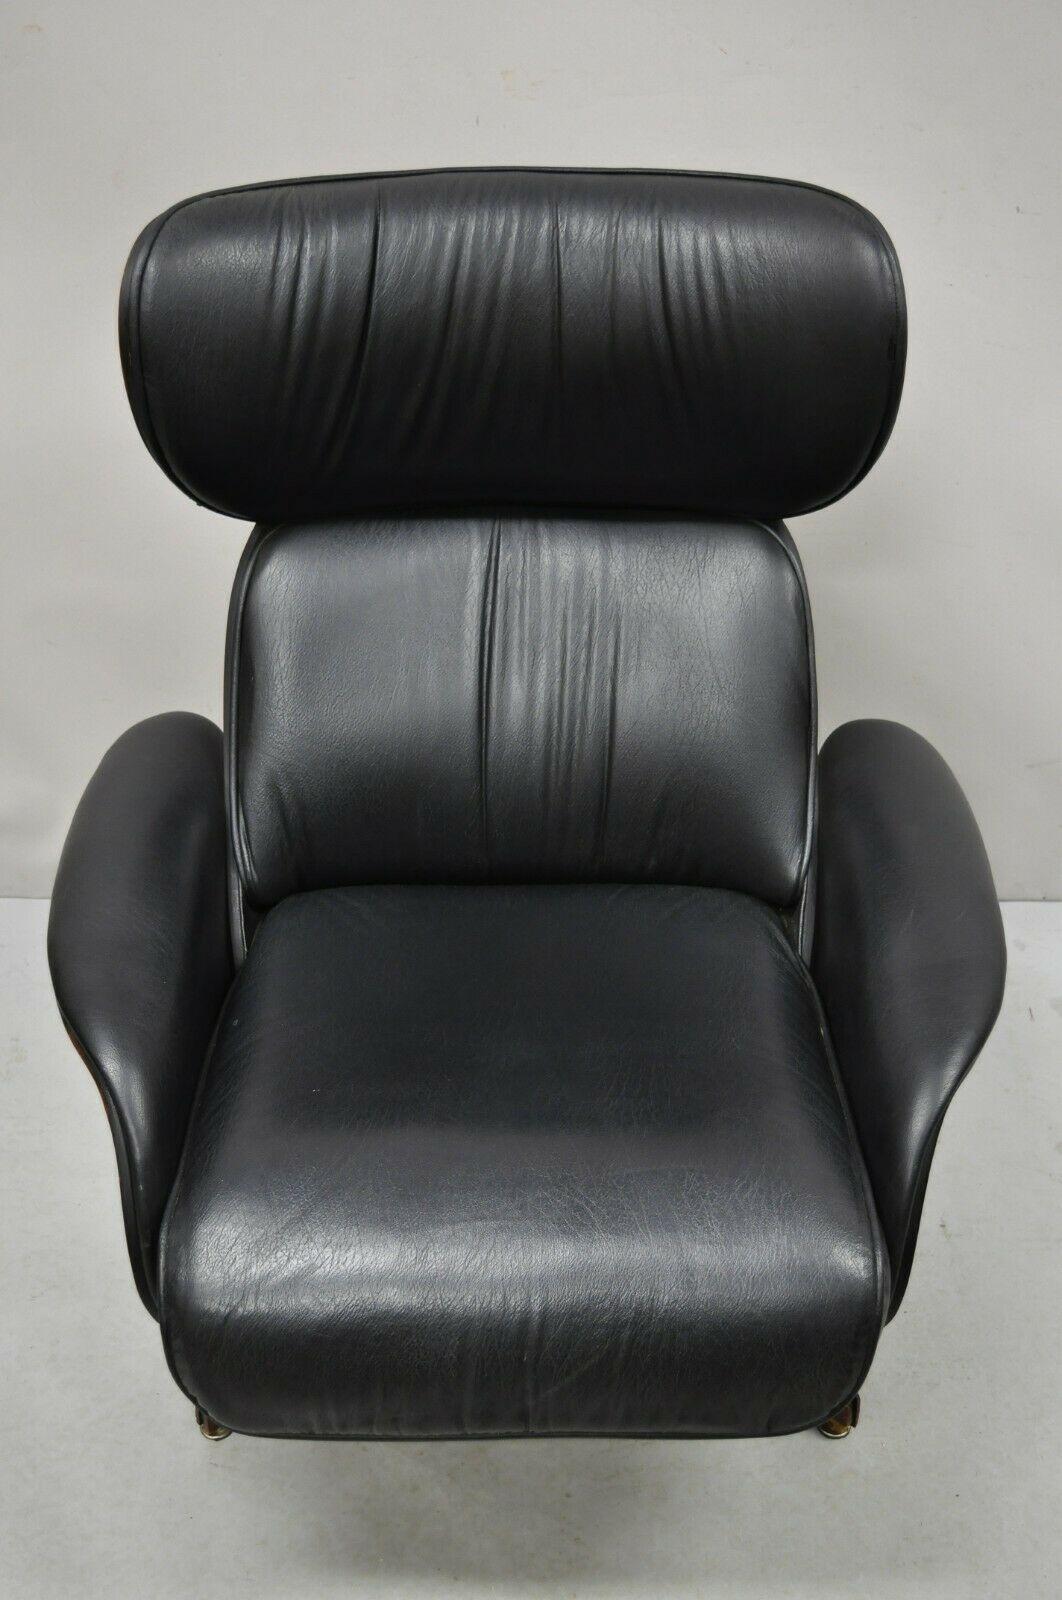 George Mulhauser Plycraft Mr. chair walnut black recliner reclining lounge chair. Item features a pop out footrest ottoman, walnut shell back, original black Naugahyde upholstery, beautiful wood grain, very rare vintage item, quality American